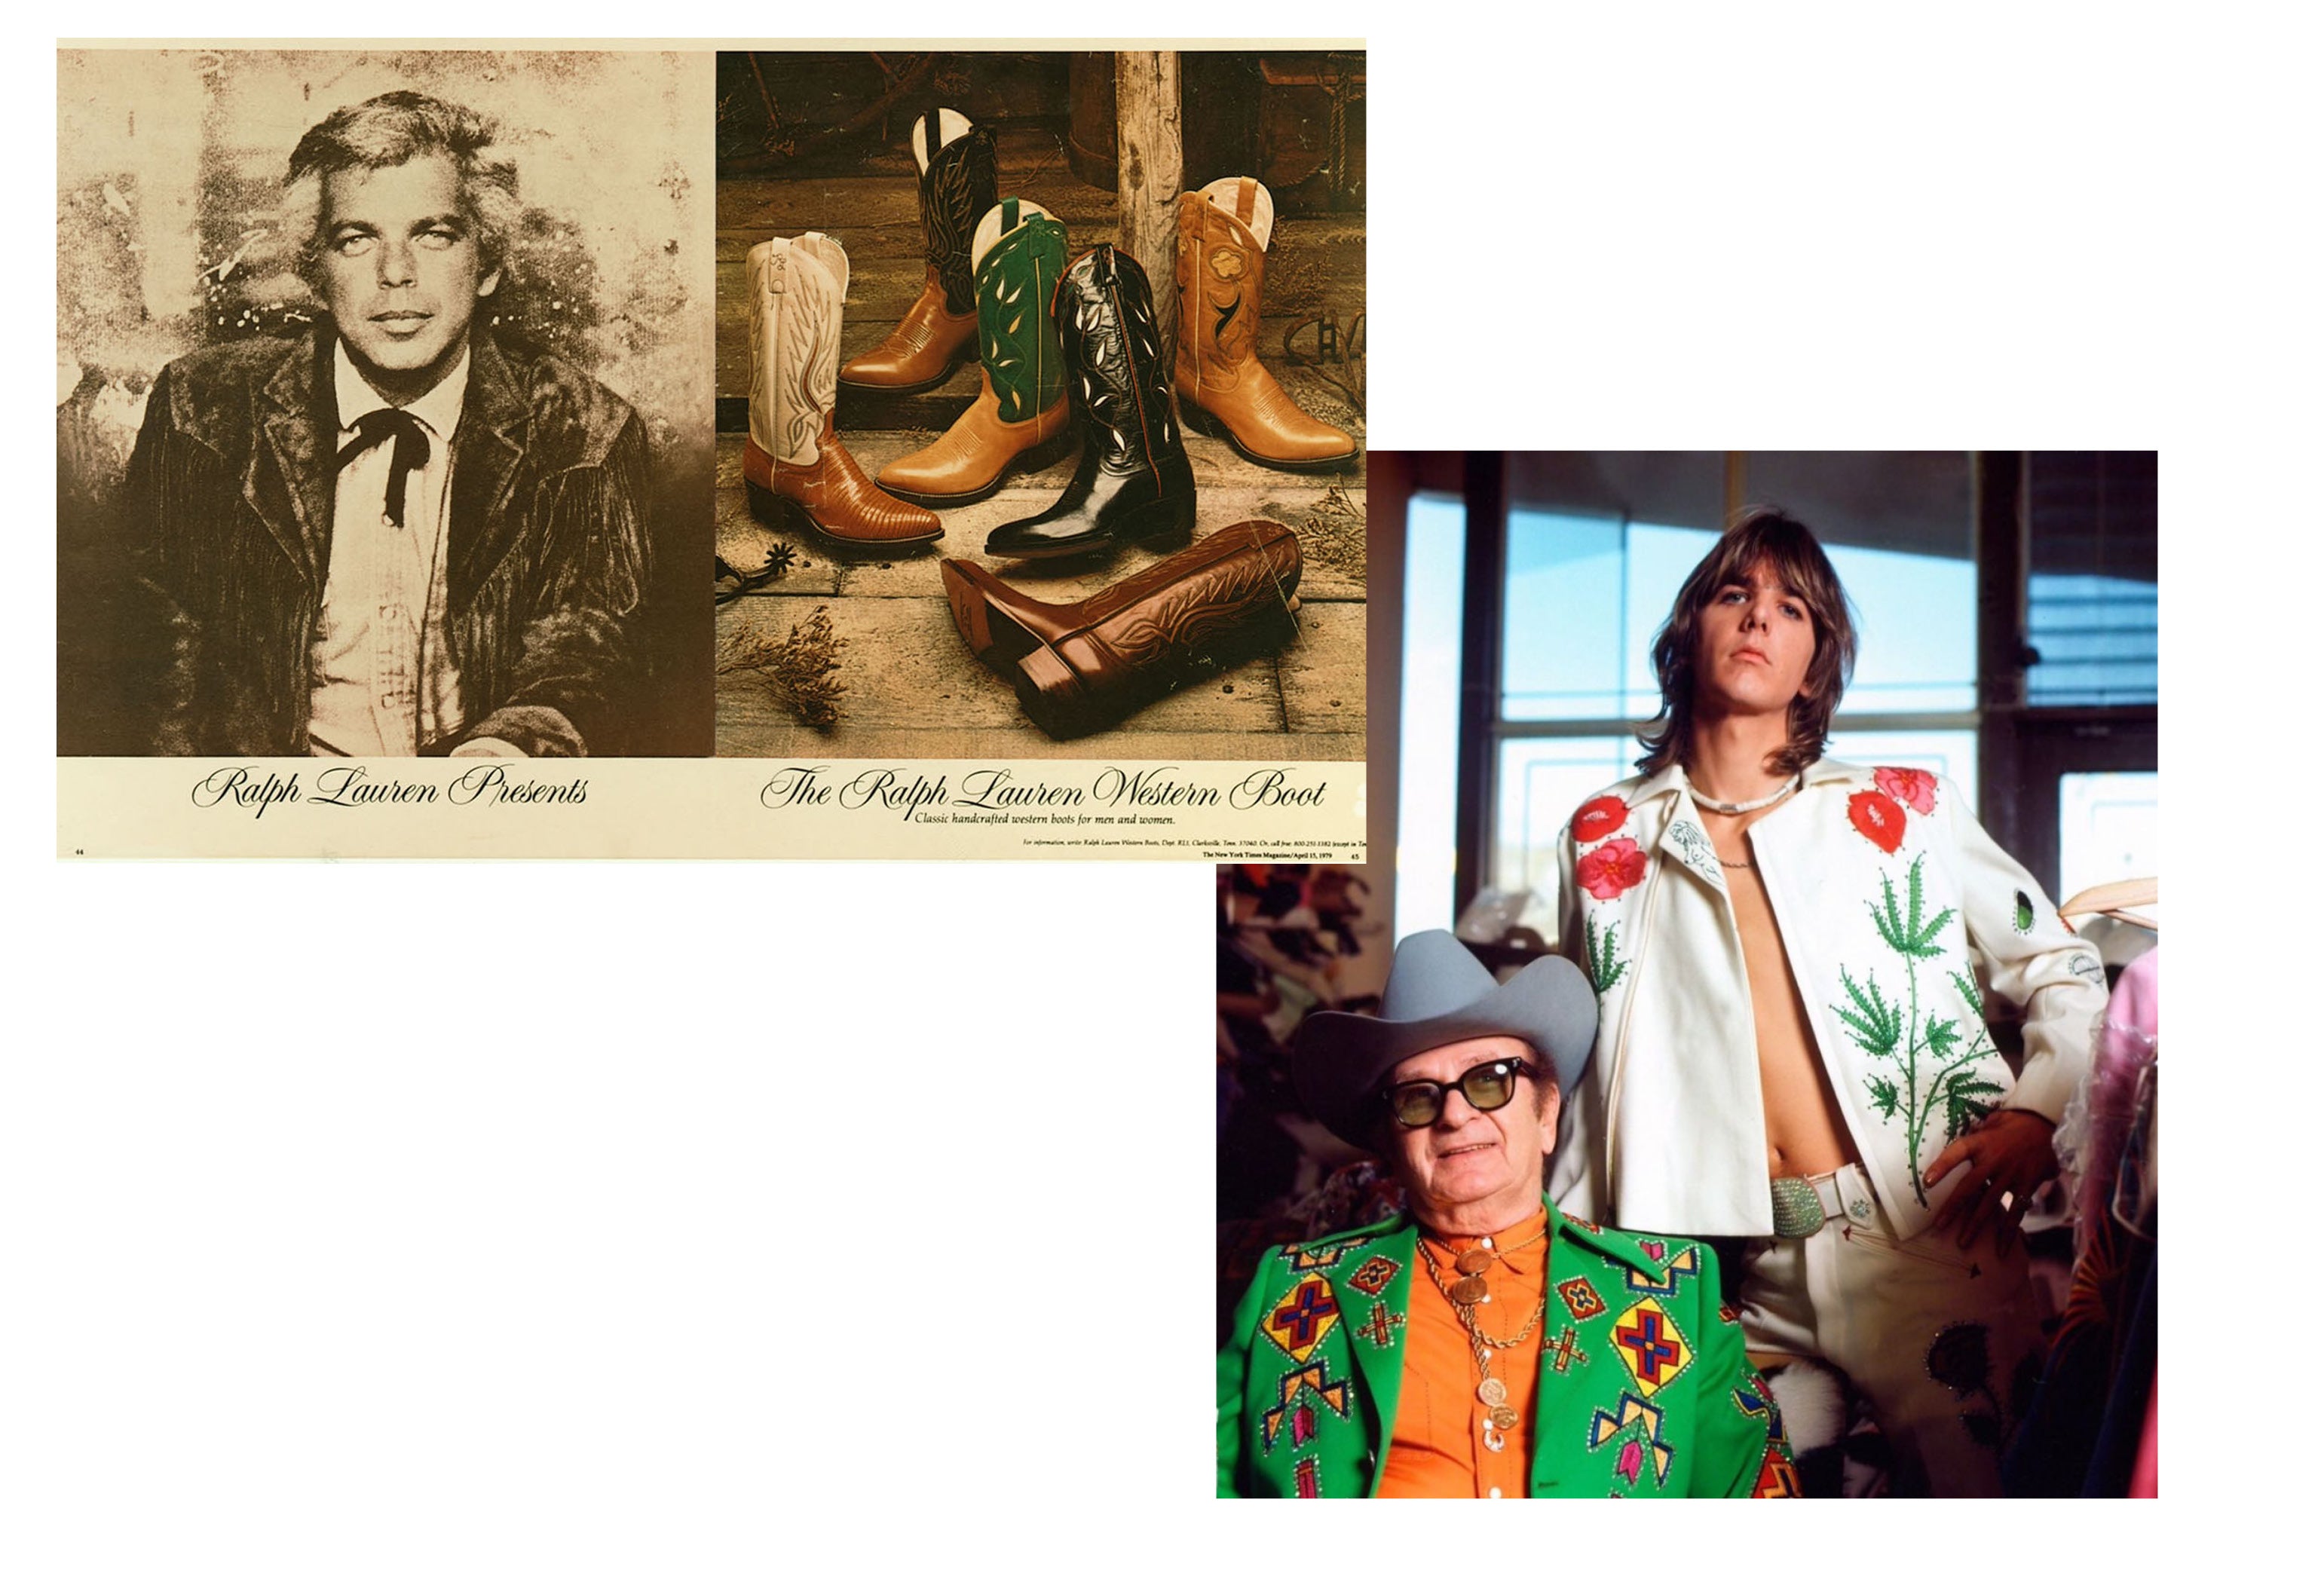 From left to right: The Ralph Lauren 1979 campaign promoting a cowboy fashion revival; Nudie Cohn with Gram Parson, both wearing the designer's Western-esque suits.